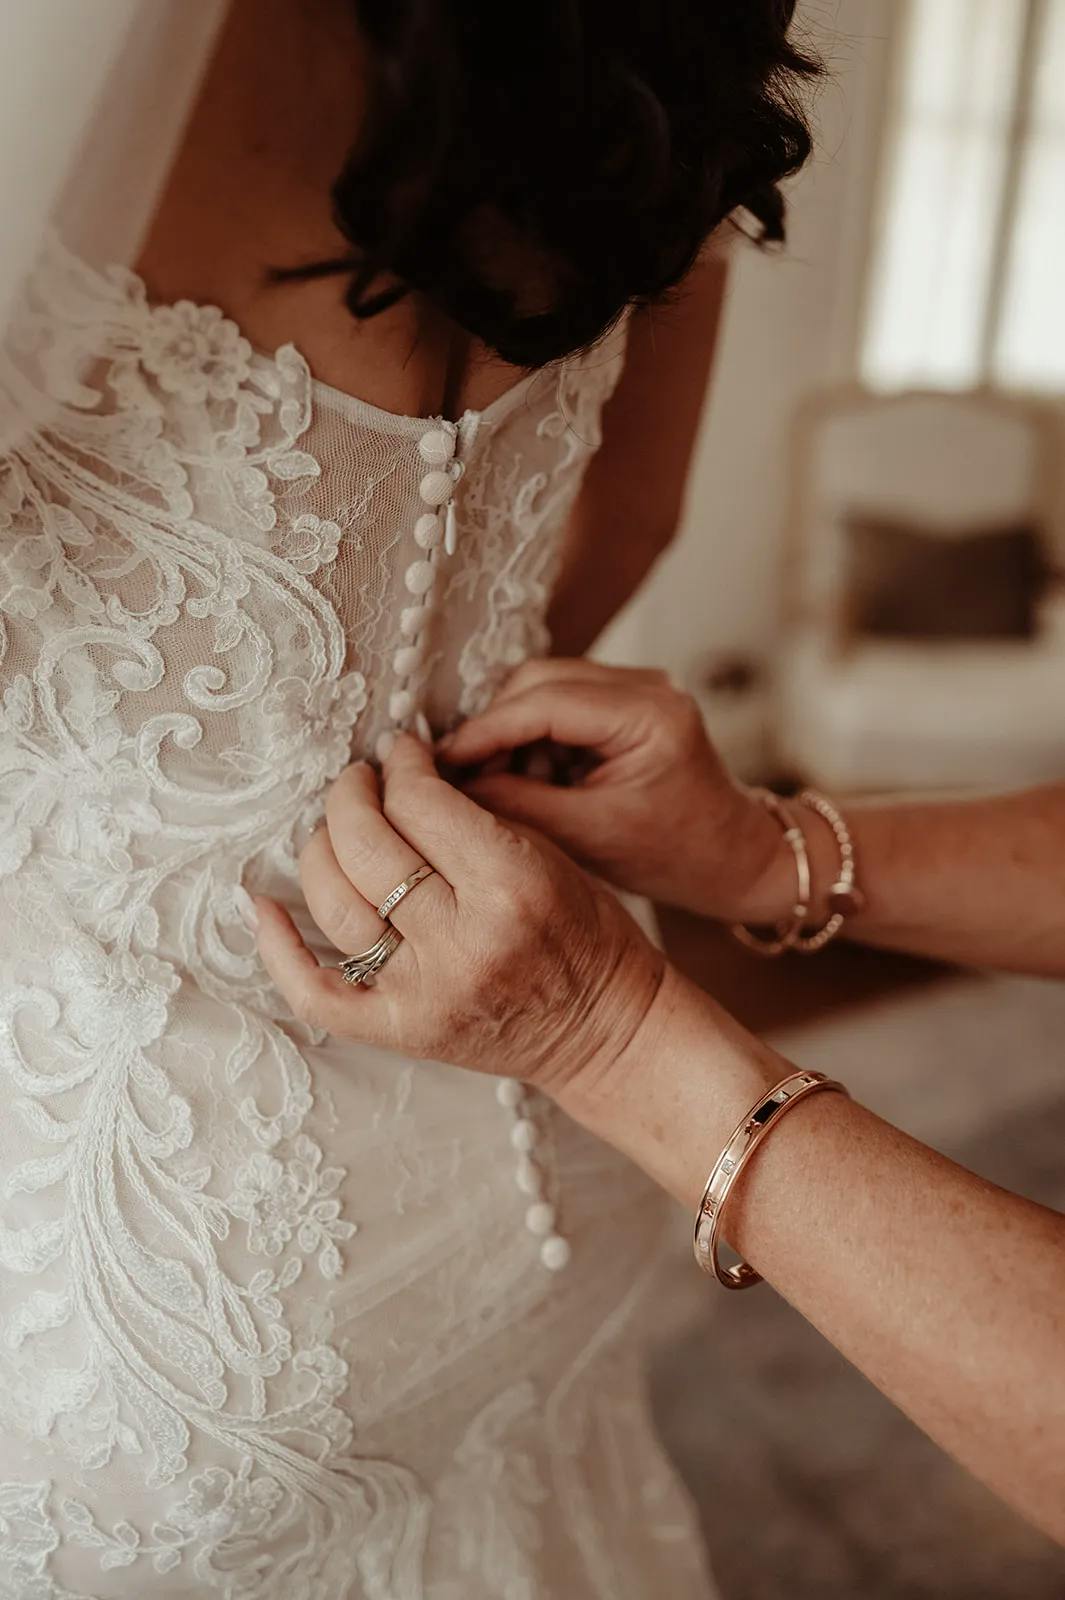 Mother of the bride doing wedding dress buttons up